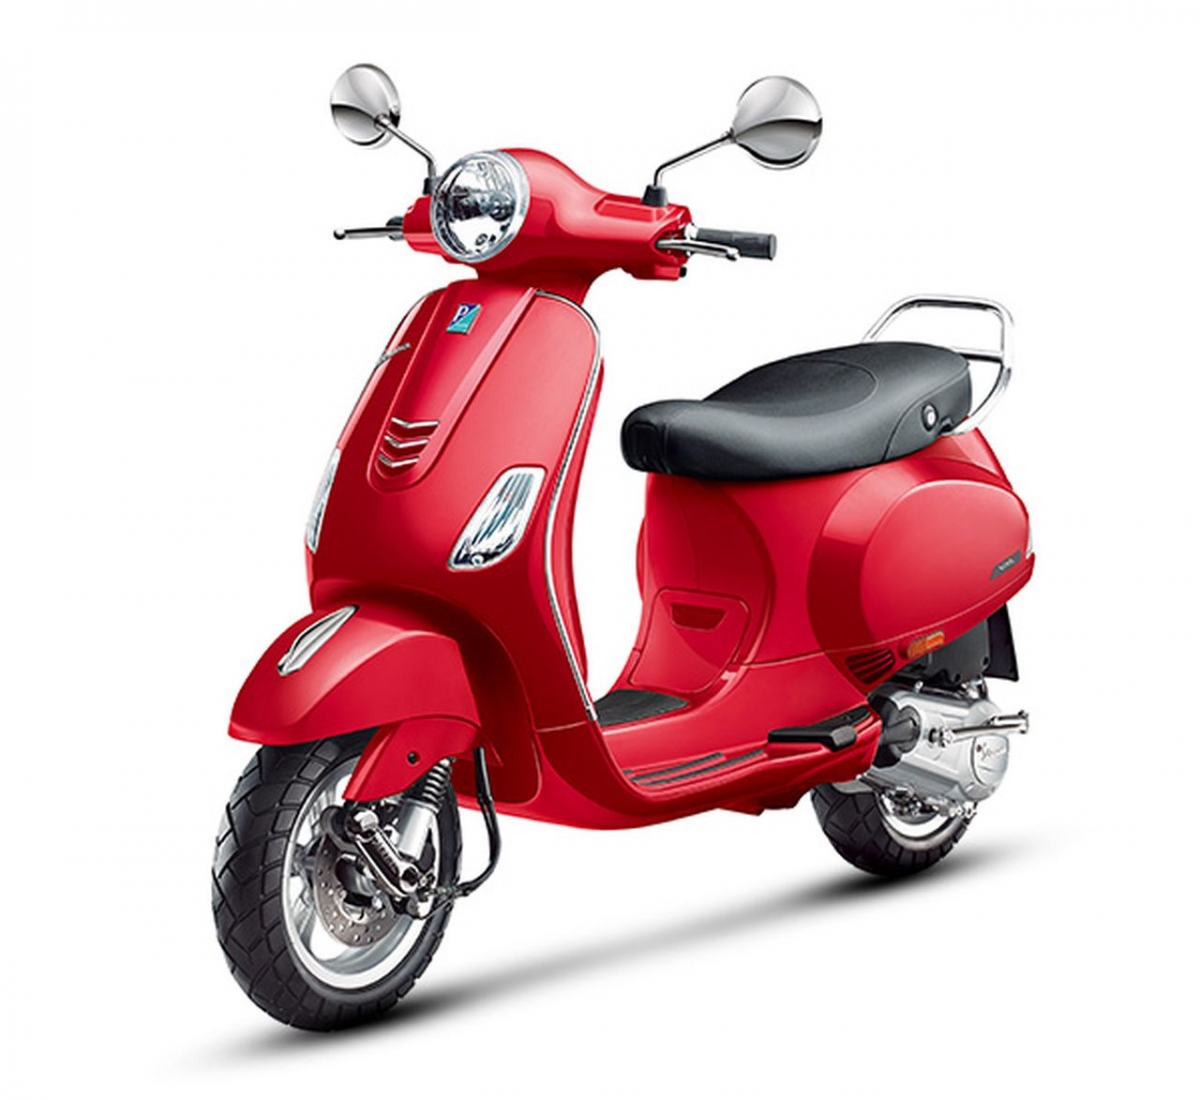 Vespa RED to be launched on October 3 and you can fight against HIV by